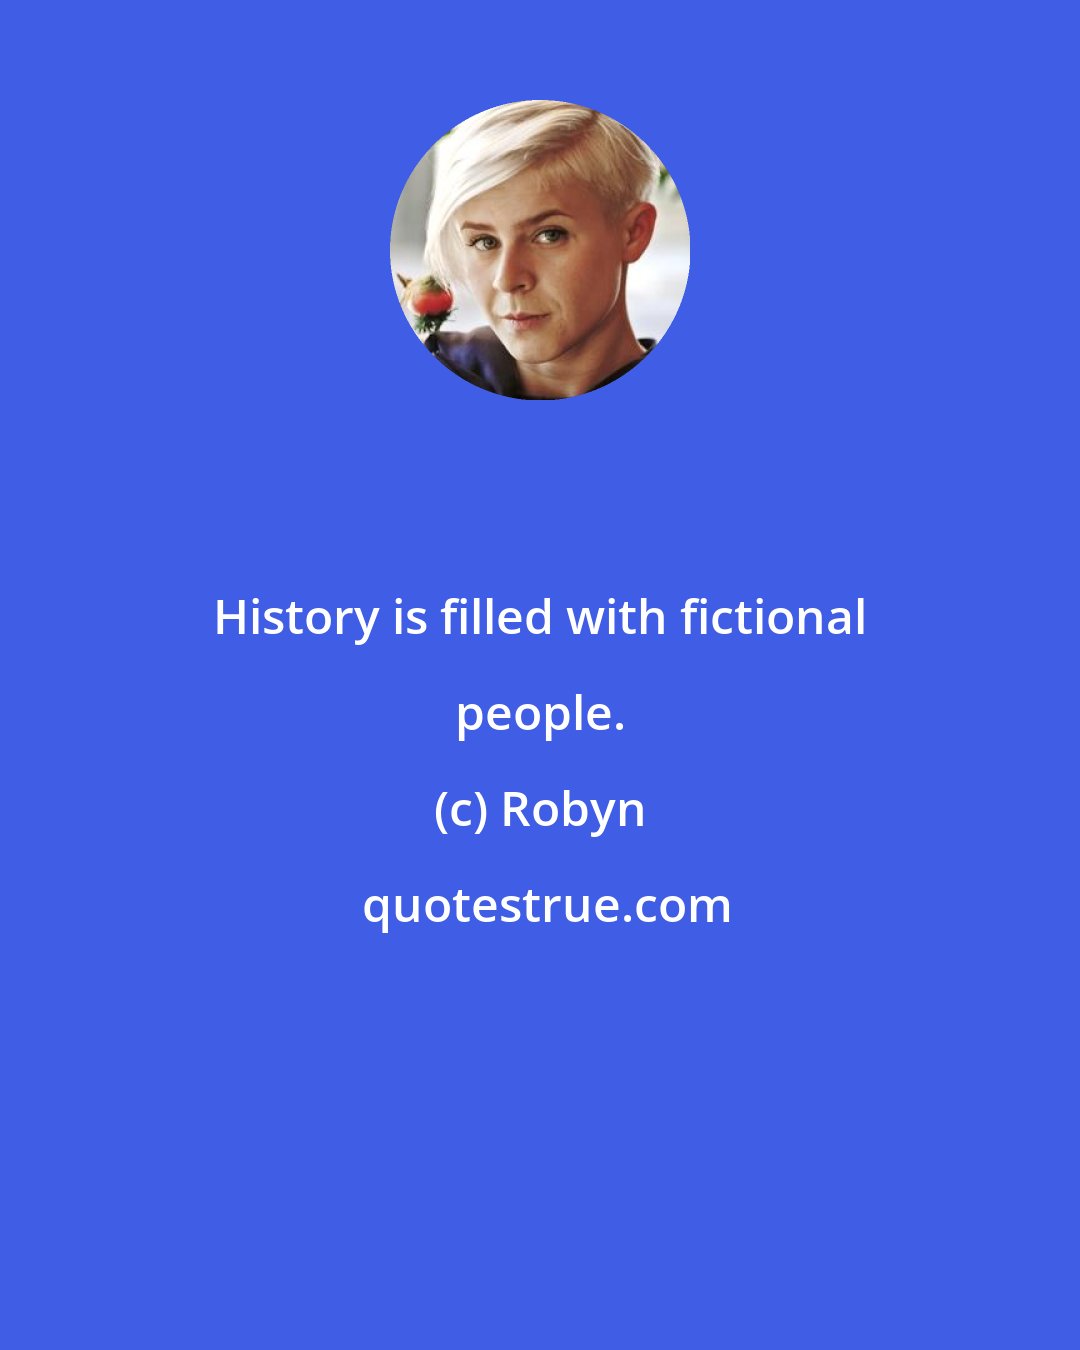 Robyn: History is filled with fictional people.